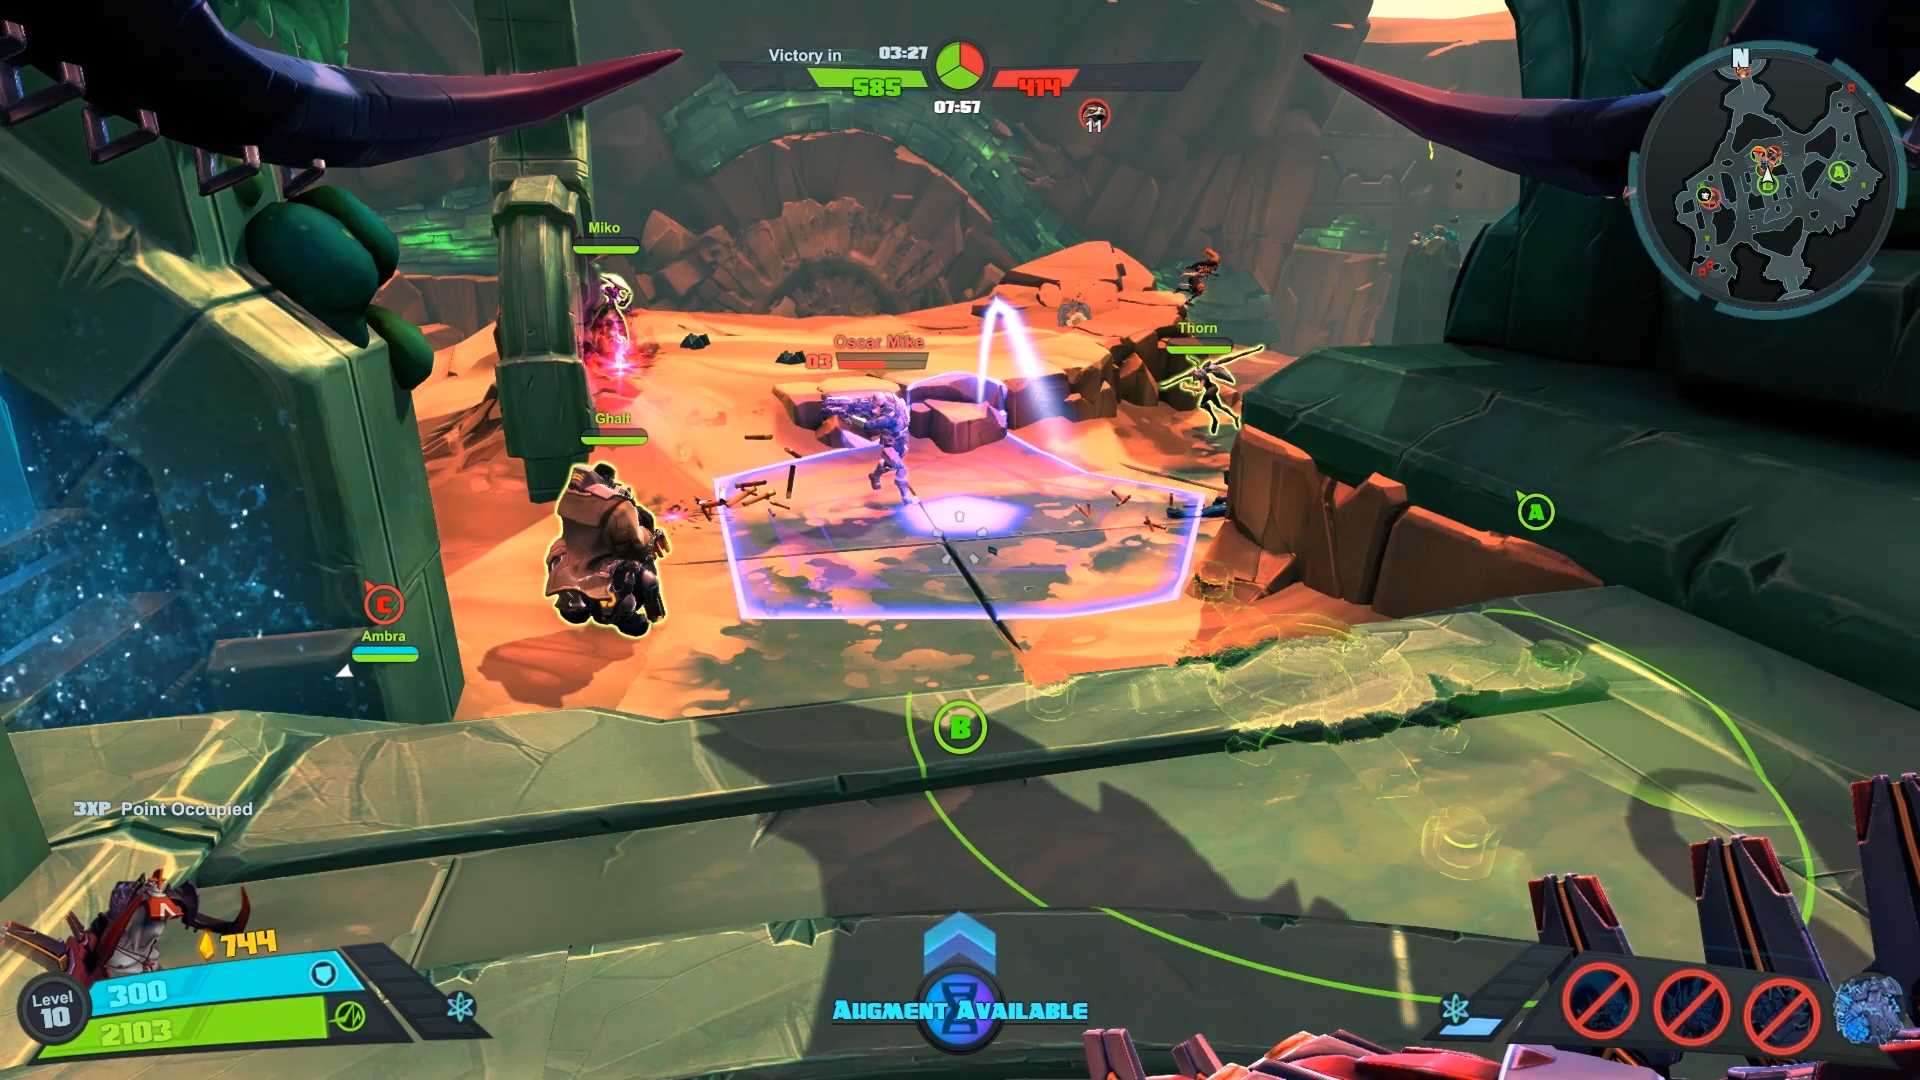 6 tips to get the most out of Battleborn